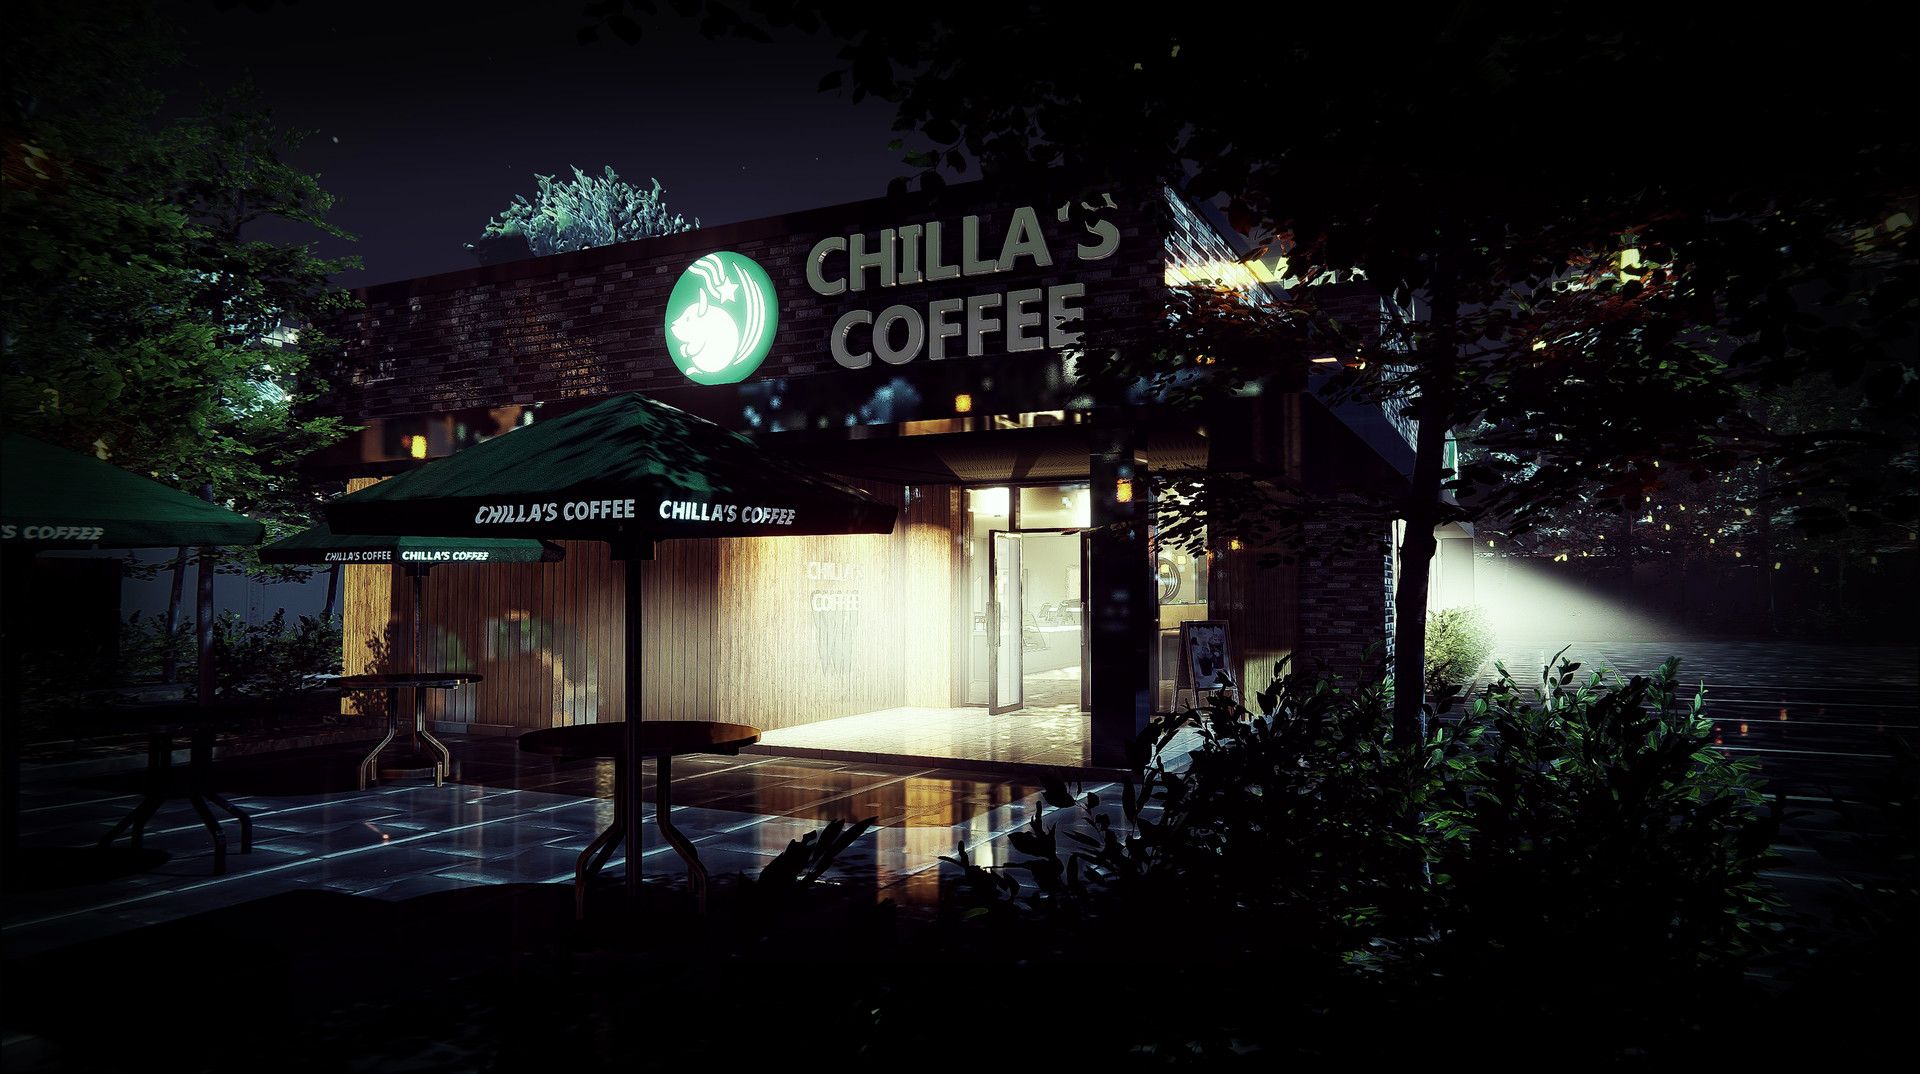 Find the best laptops for [Chilla's Art] The Closing Shift | 閉店事件